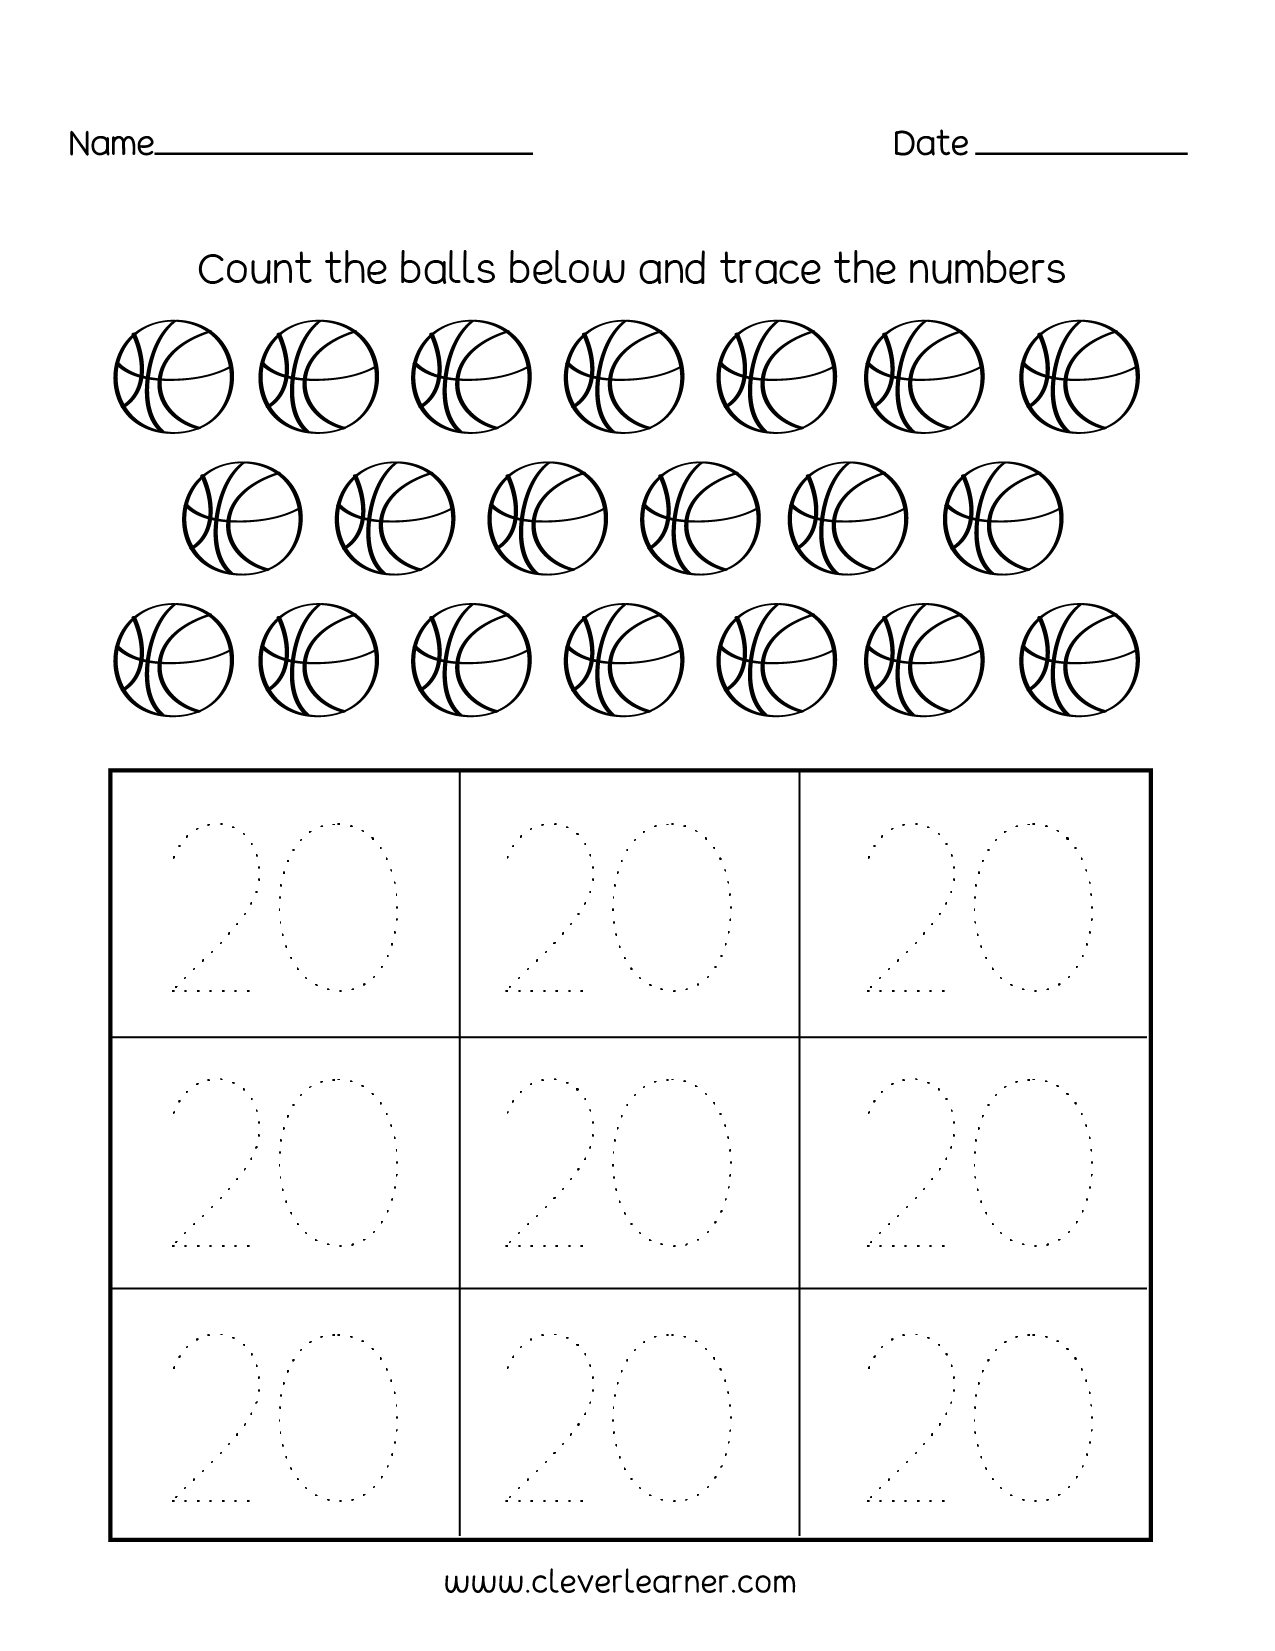 number-20-writing-counting-and-identification-printable-worksheets-for-children